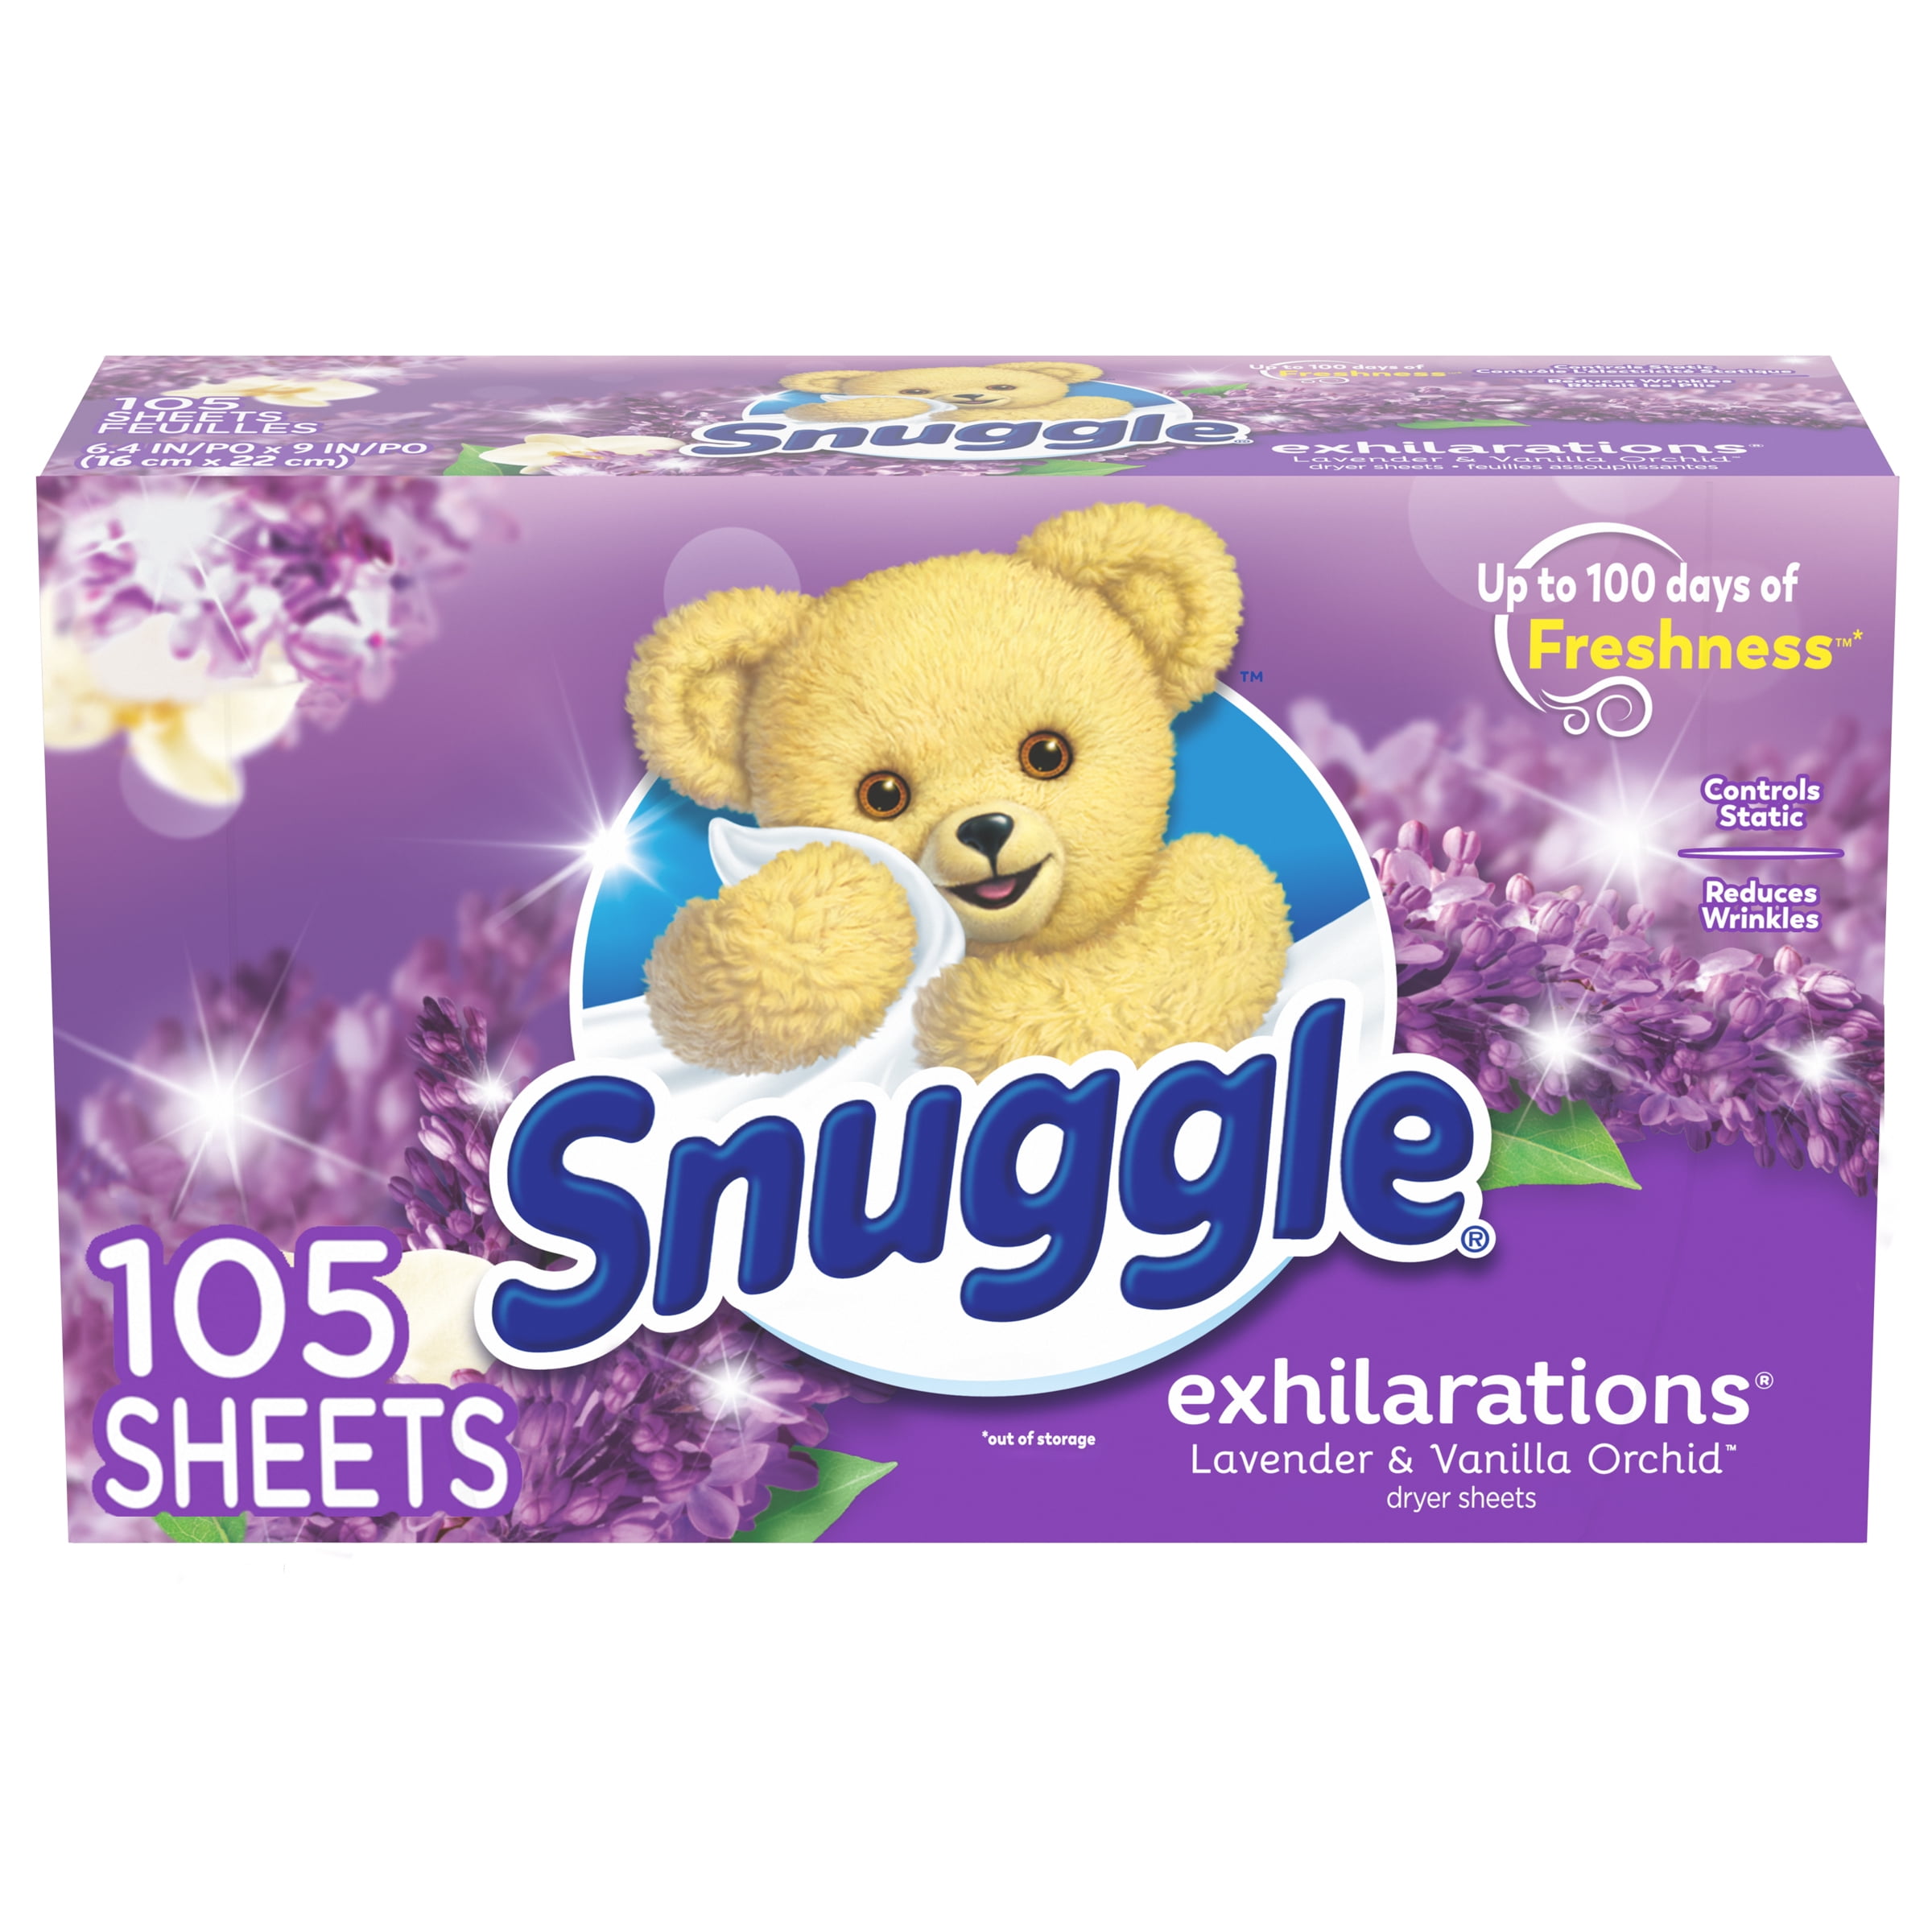 Lilies and Linen 105 Sheets Snuggle SuperCare Fabric Softener Dryer Sheets 